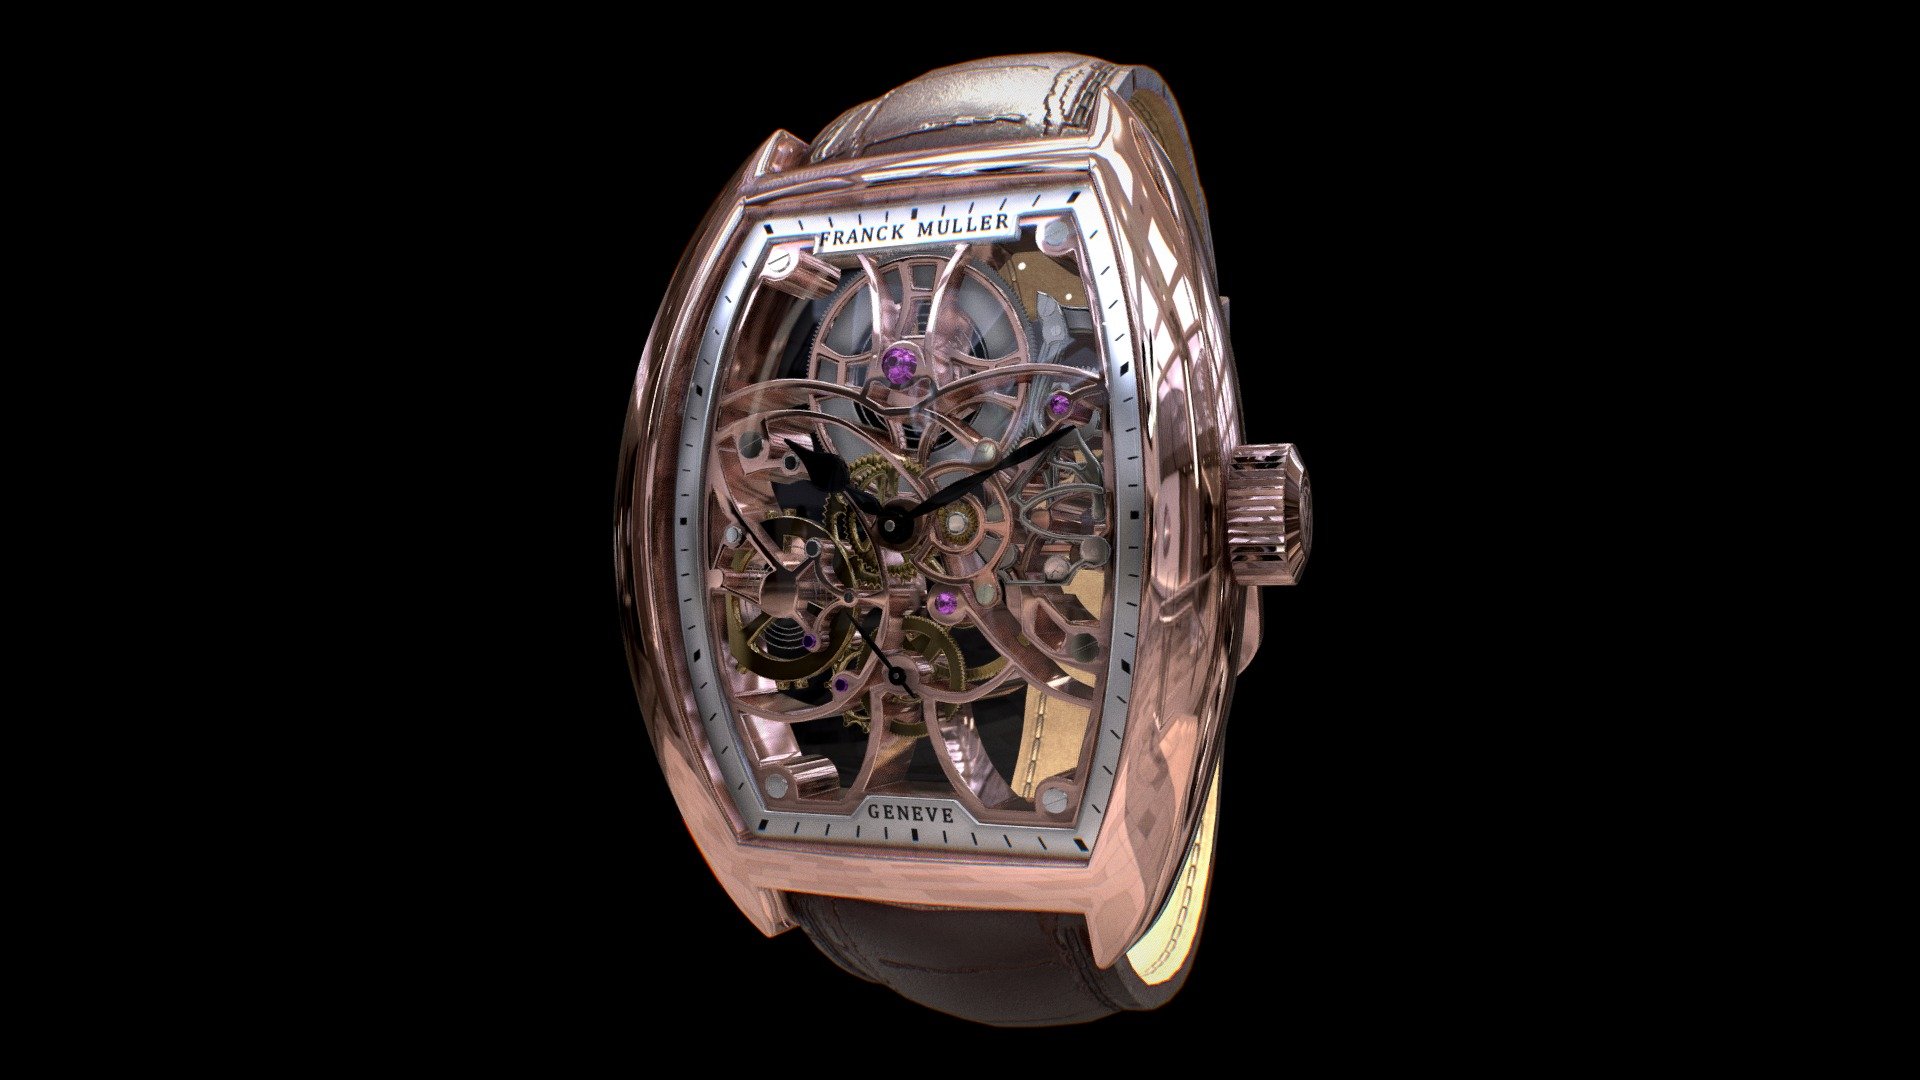 Awesome stainless steel Đồng Hồ Franck Muller Cintrée Curvex Skeleton 8880 B S6 SQT Watch․
Use for Unreal Engine 4 and Unity3D. Try in augmented reality in the AR-Watches app. 
Links to the app: Android, iOS

Currently available for download in FBX format.

3D model developed by AR-Watches

Disclaimer: We do not own the design of the watch, we only made the 3D model 3d model